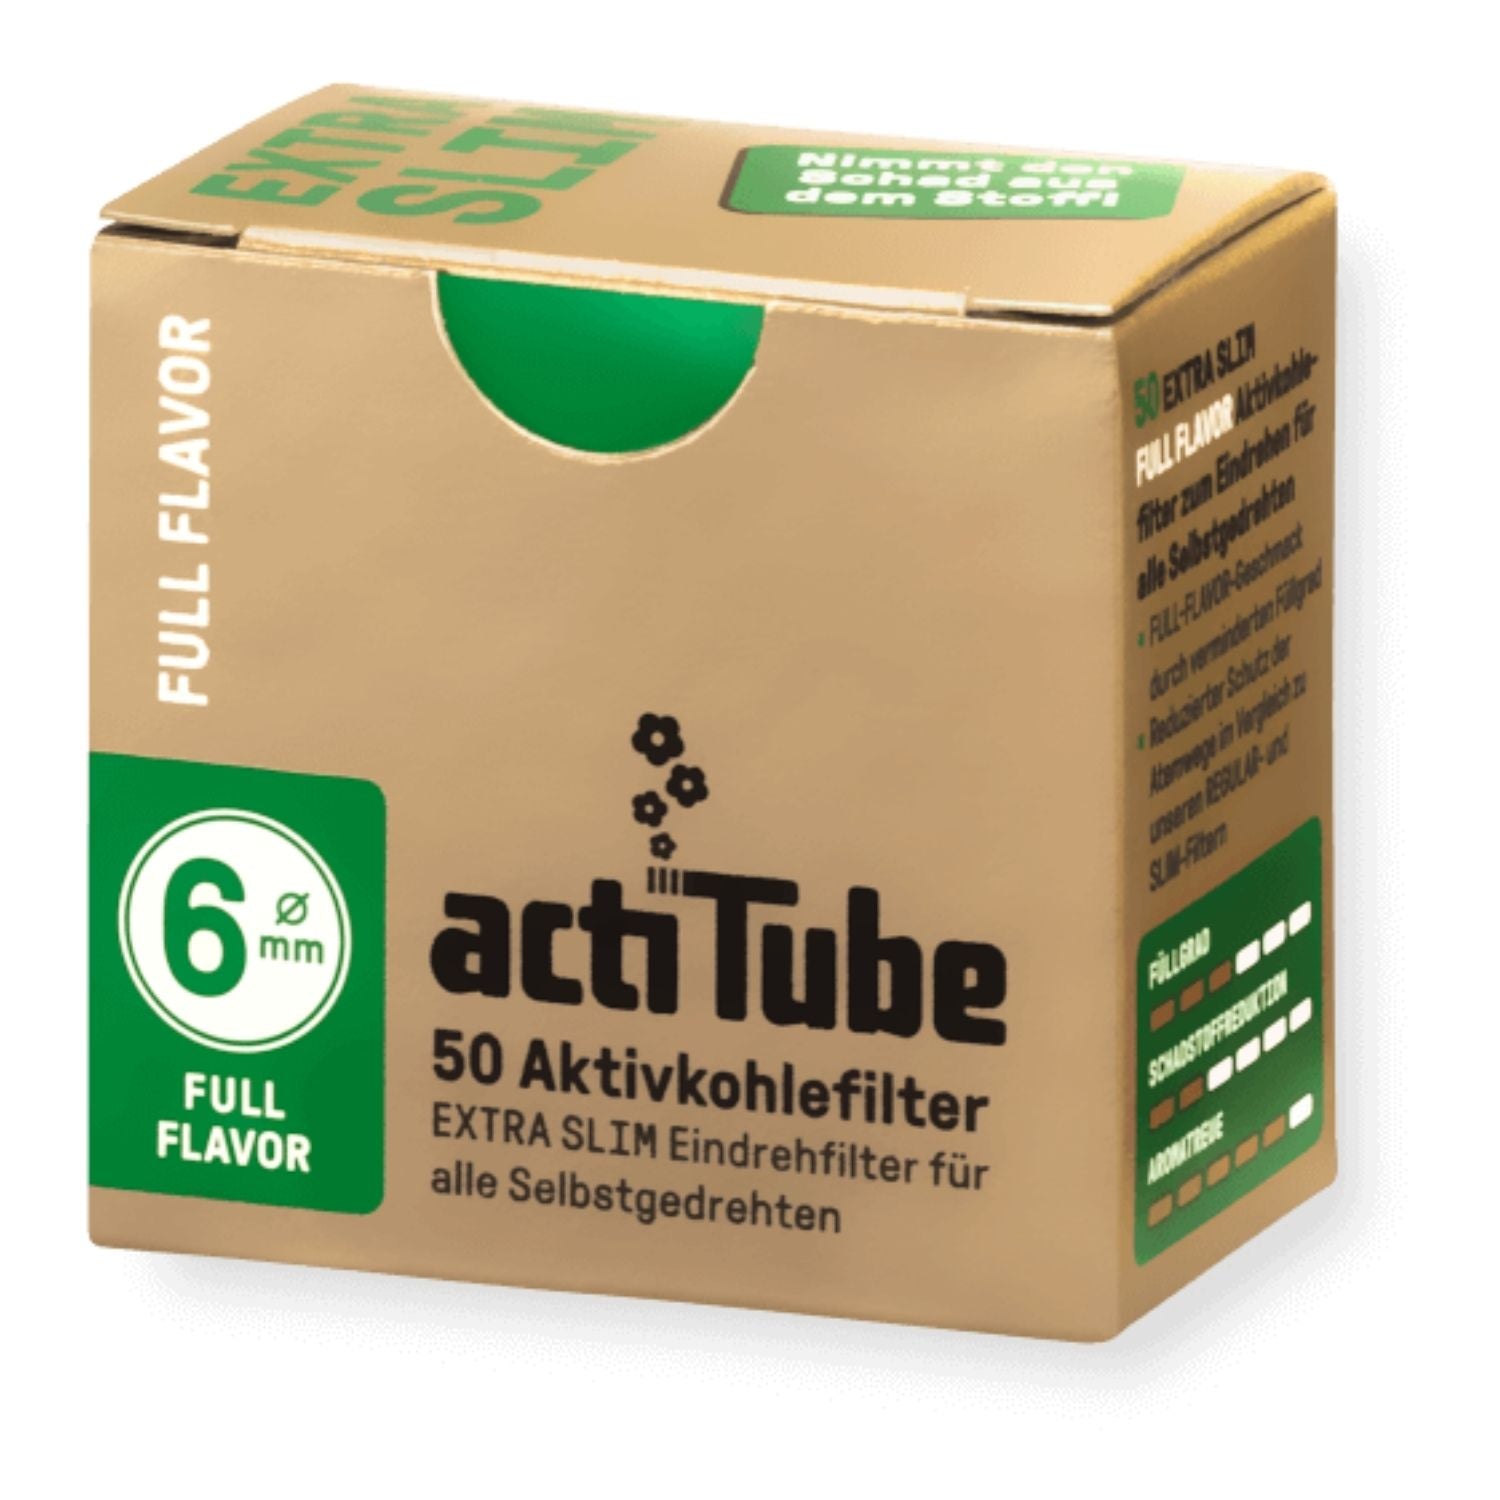 ActiTube Activated Charcoal Extra Slim Filters - 50 Tips